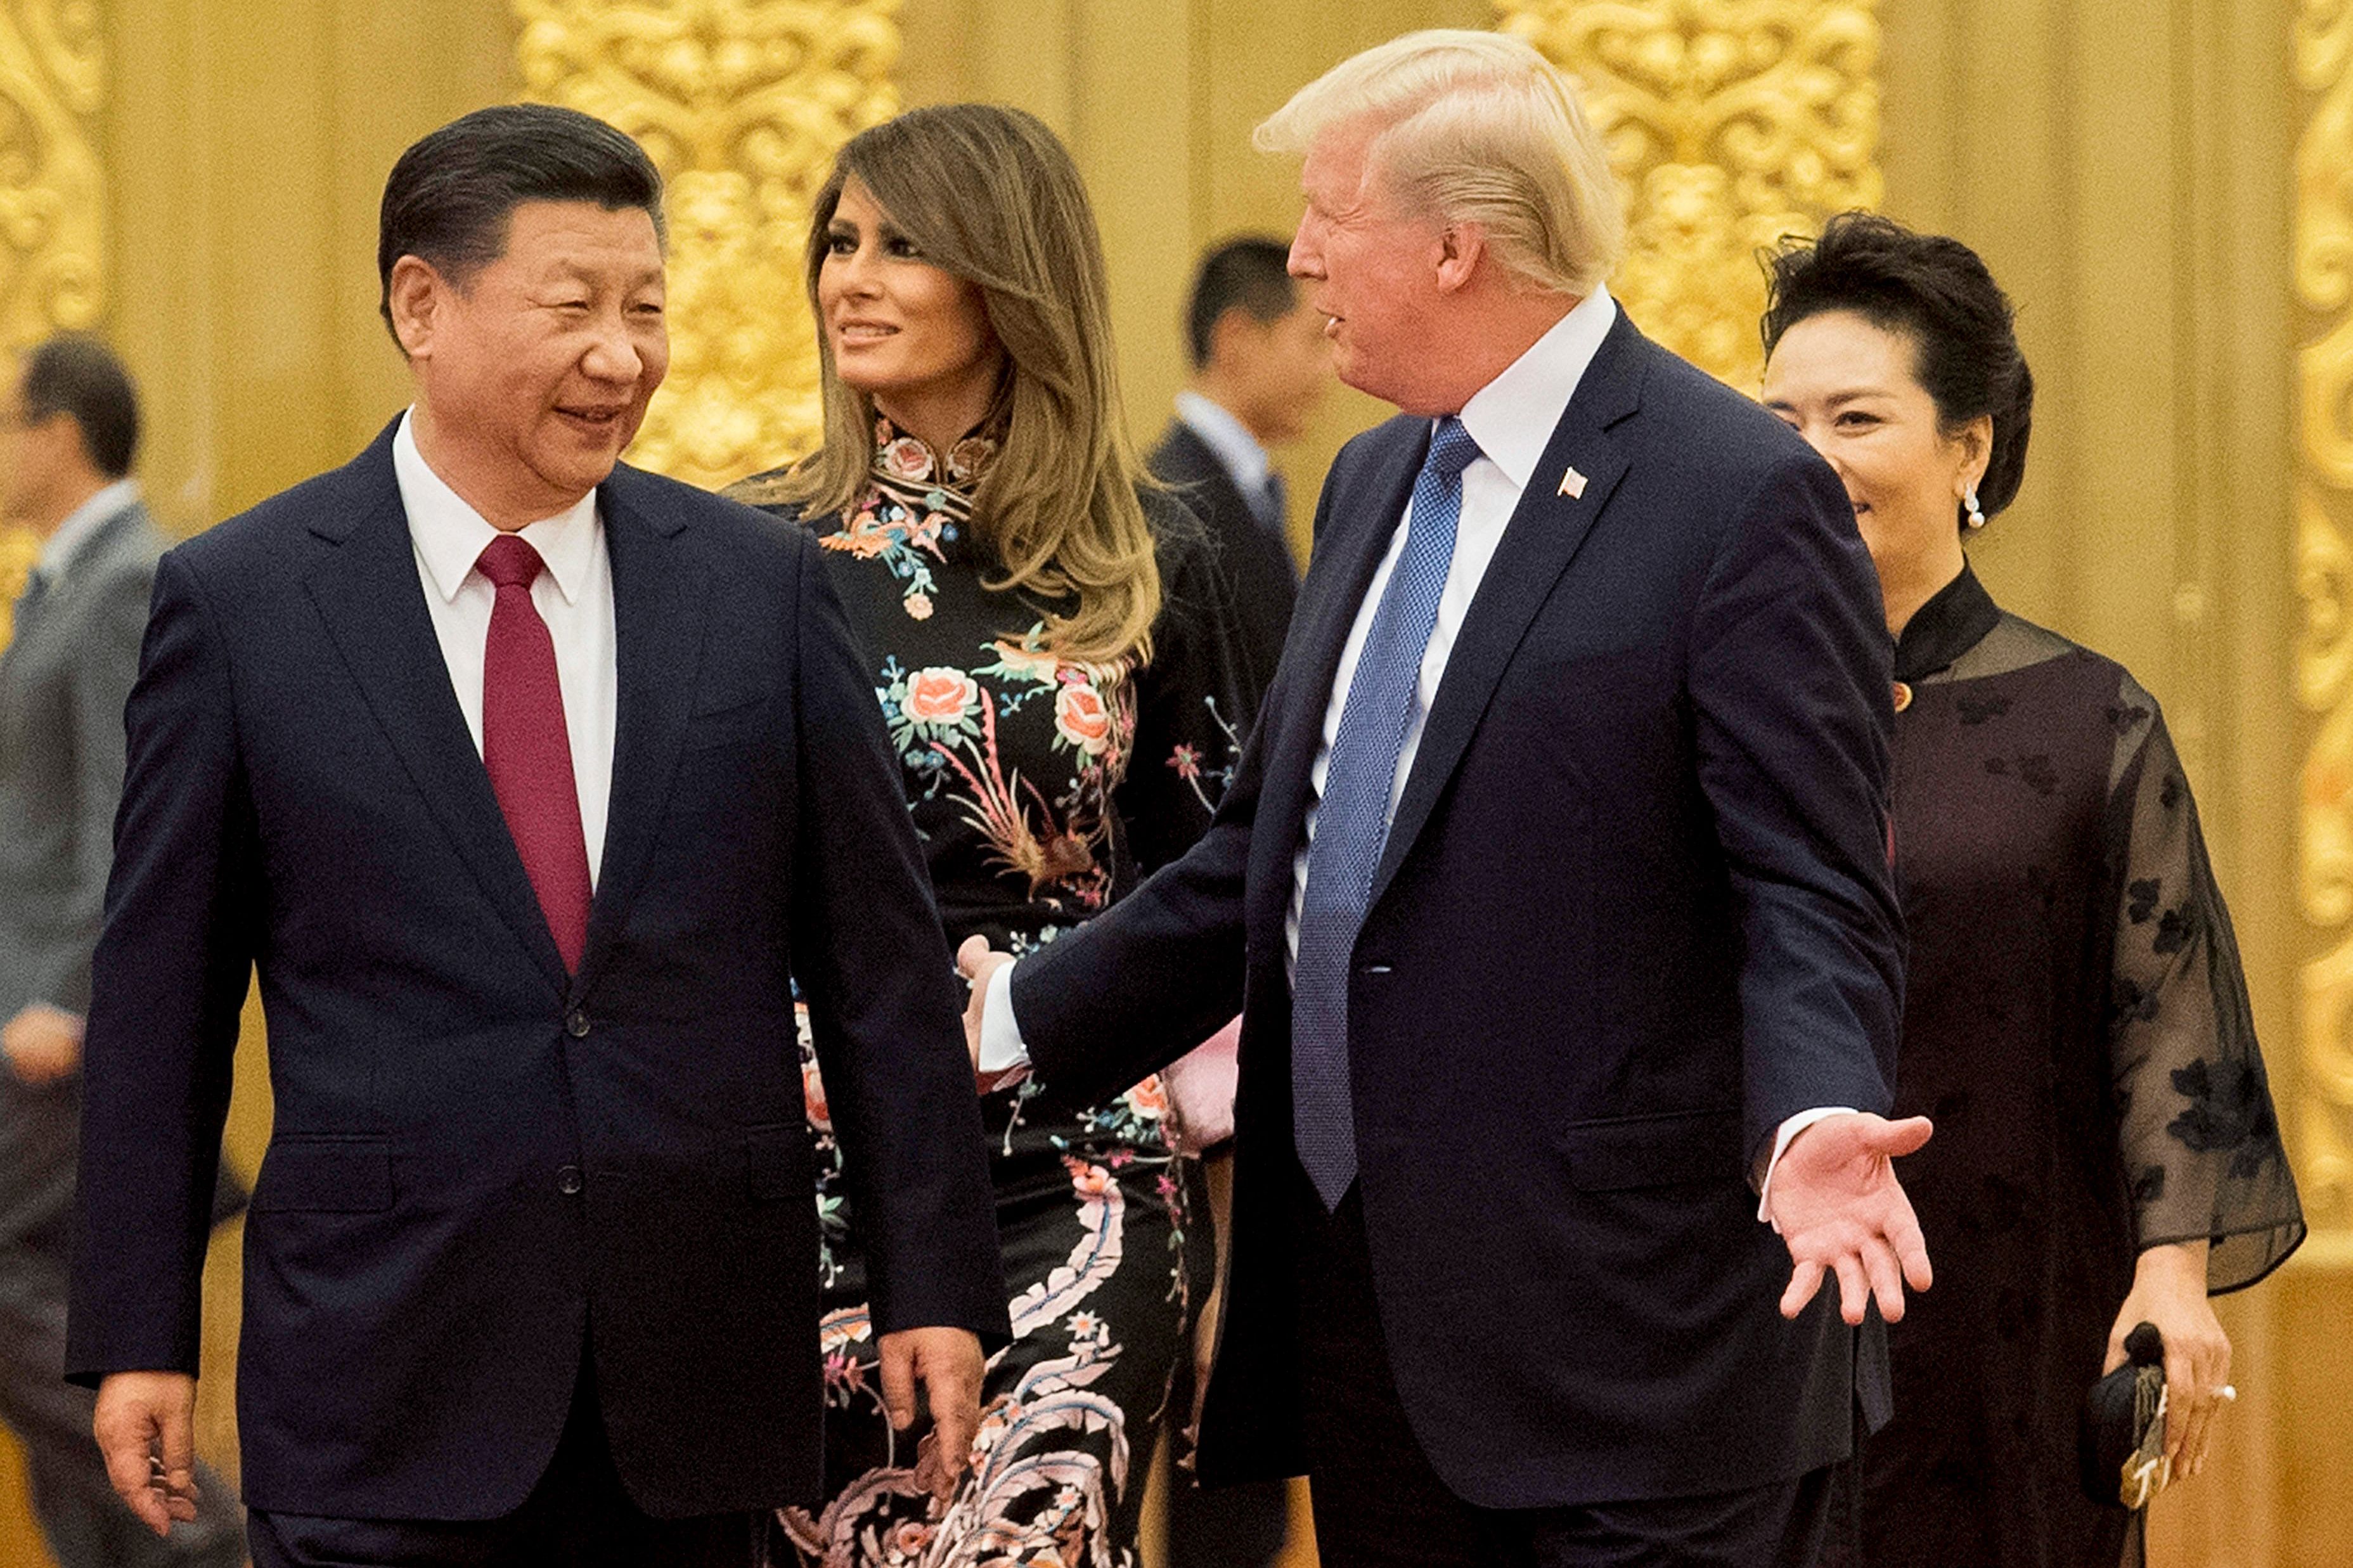 US President Donald Trump (2nd R) speaks to China's President Xi Jinping (L) in front of US First Lady Melania Trump (2nd L) and Xi's wife Peng Liyuan (R) in the Great Hall of the People in Beijing on November 9, 2017. Donald Trump urged Chinese leader Xi Jinping to work hard and act fast to help resolve the North Korean nuclear crisis during talks in Beijing Thursday, warning that "time is quickly running out". (Photo: JIM WATSON/AFP via Getty Images)